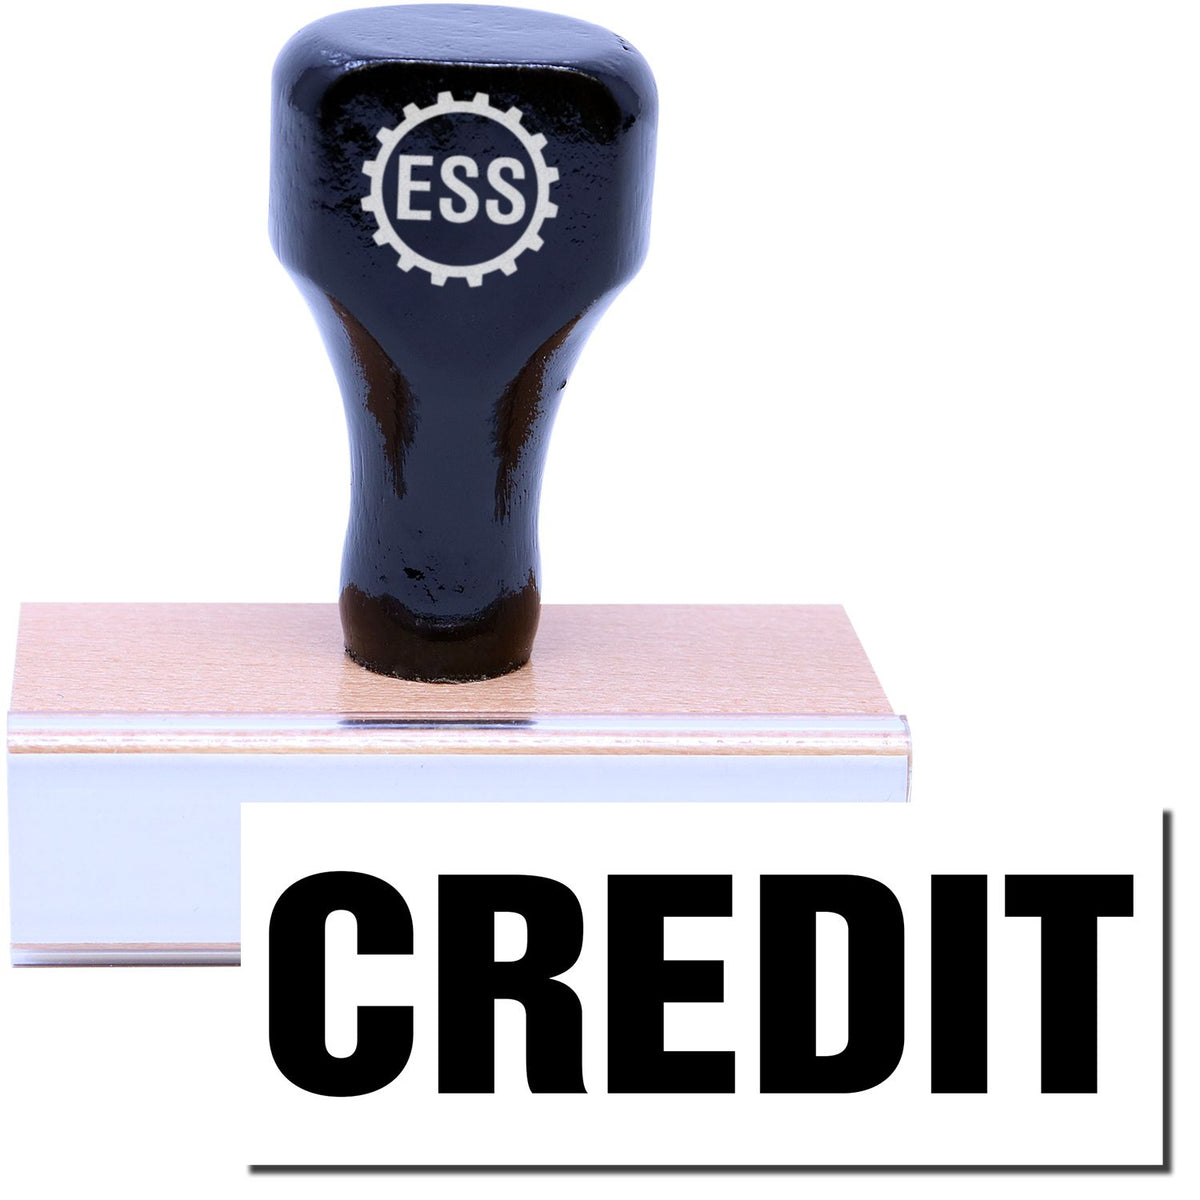 A stock office rubber stamp with a stamped image showing how the text &quot;CREDIT&quot; in a large font is displayed after stamping.